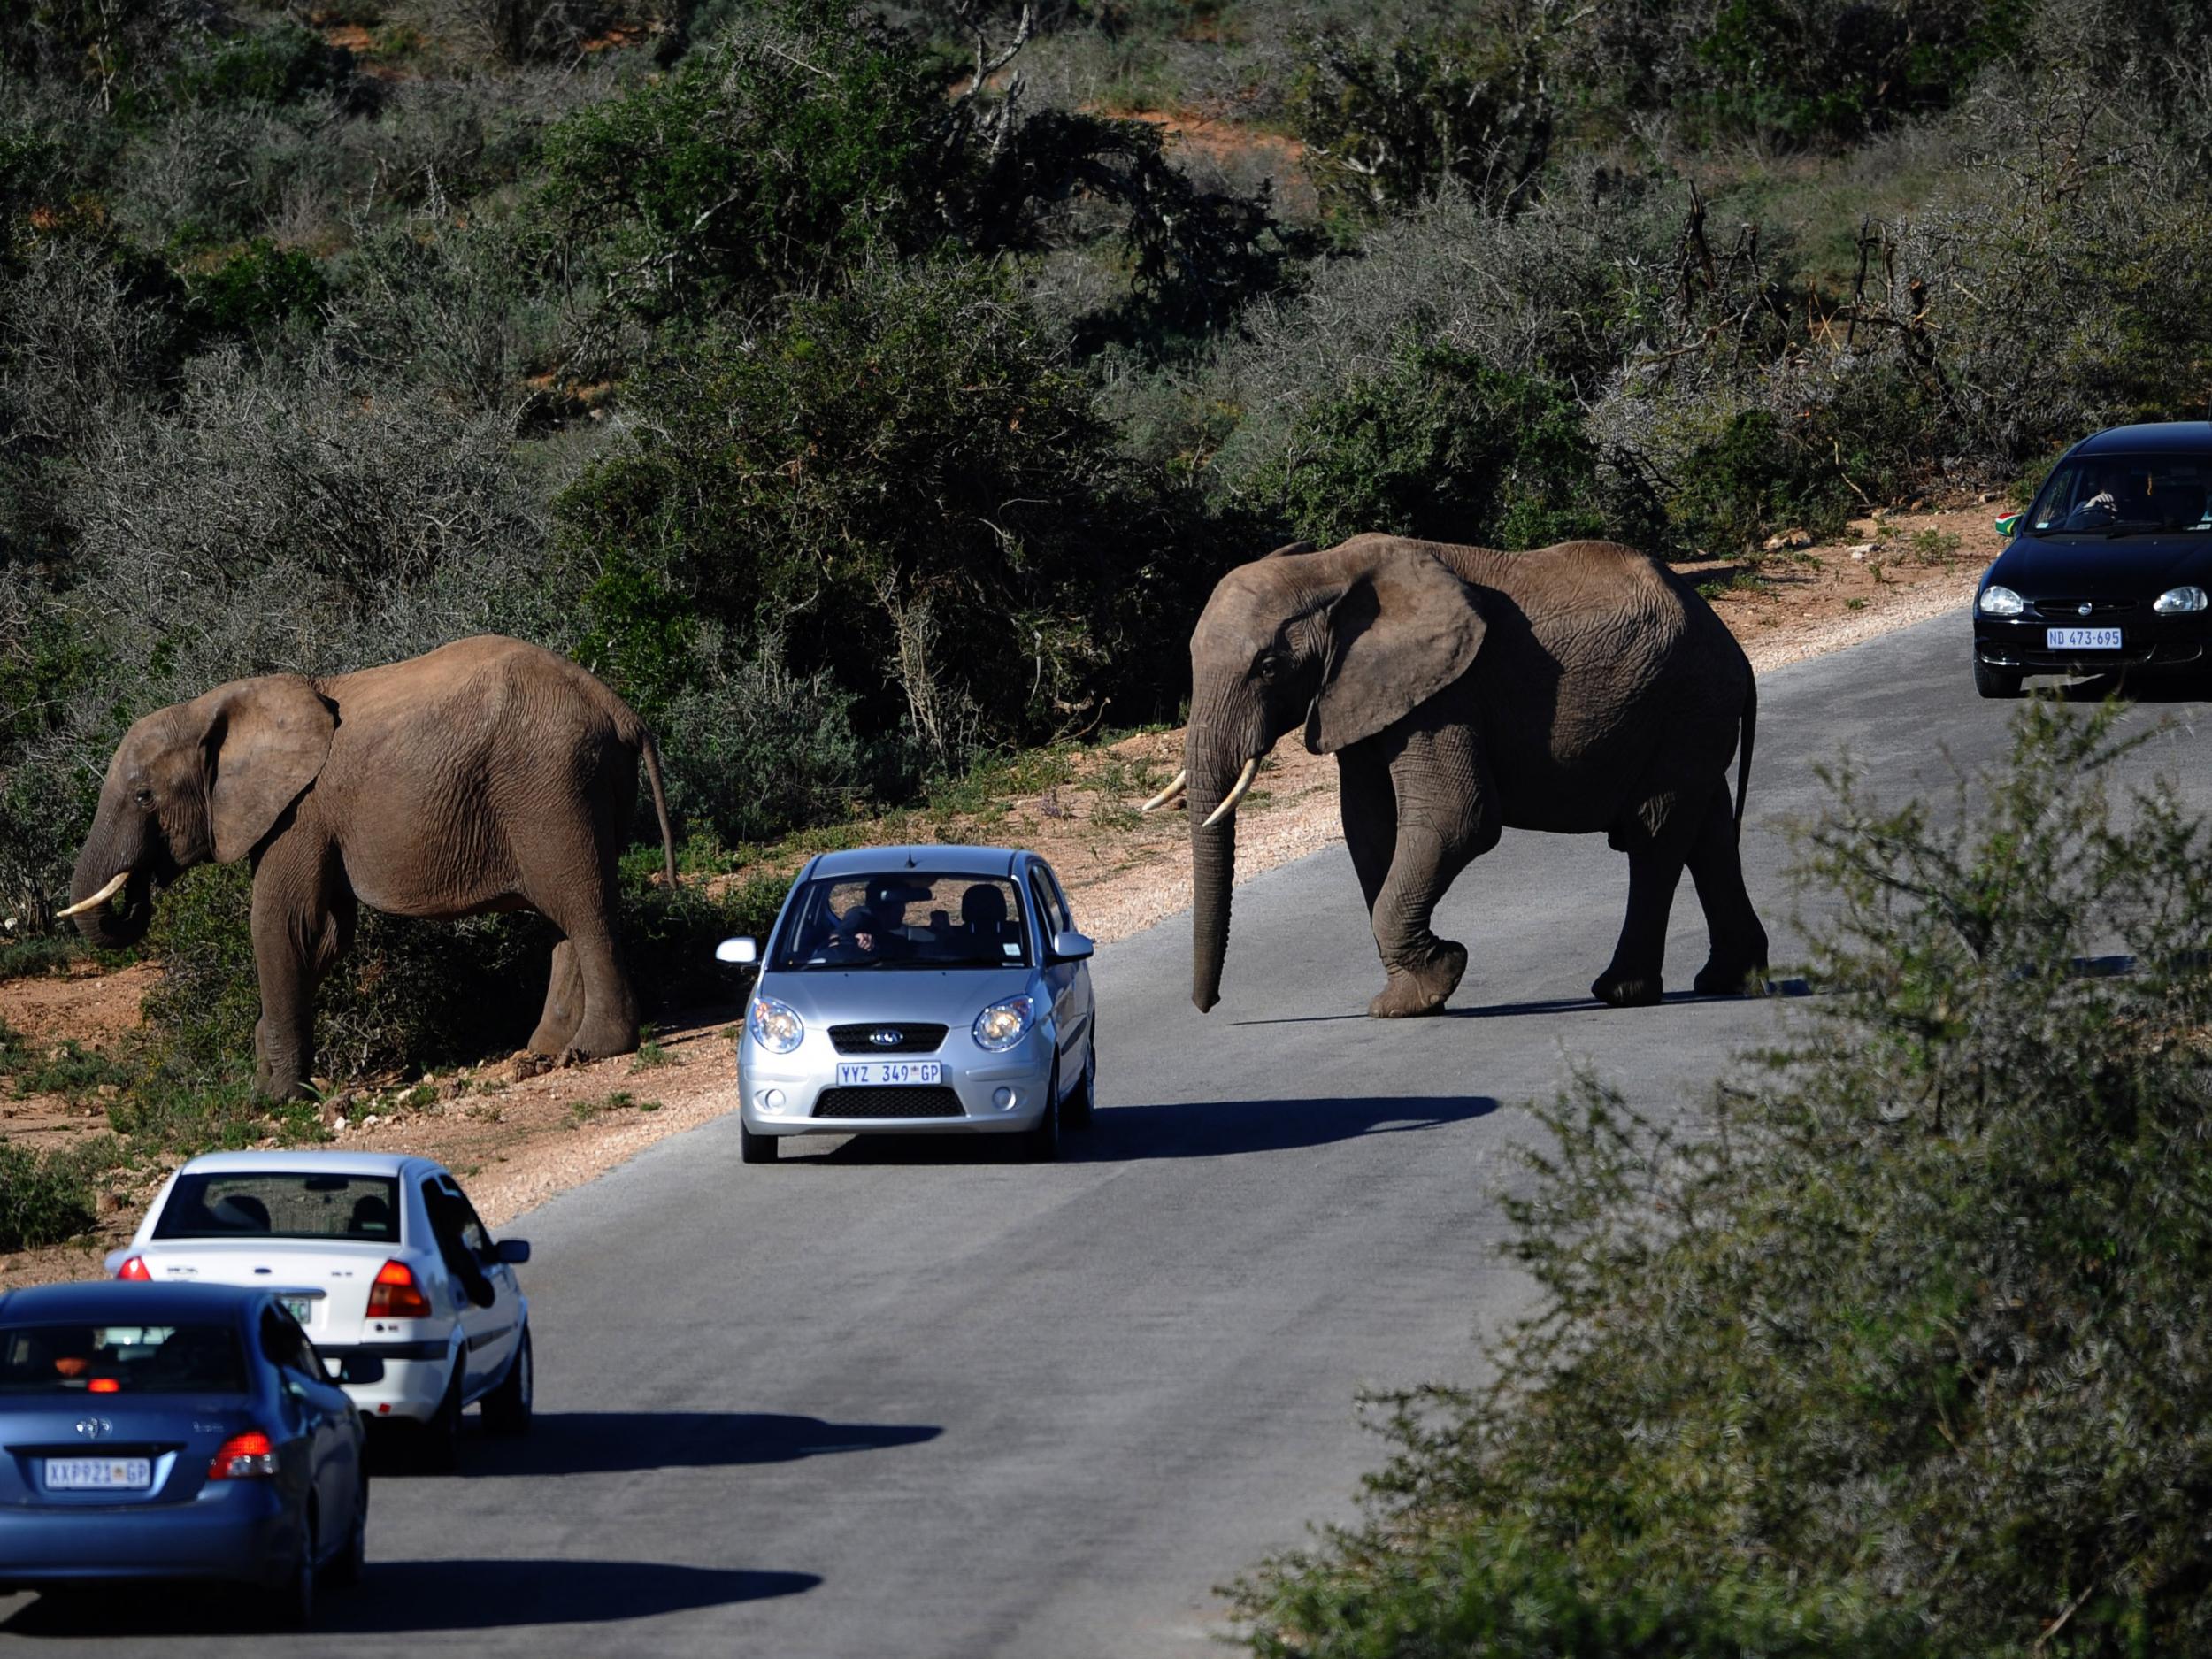 Elephants, pictured here in South Africa, can often be endangered when then wander near human settlements